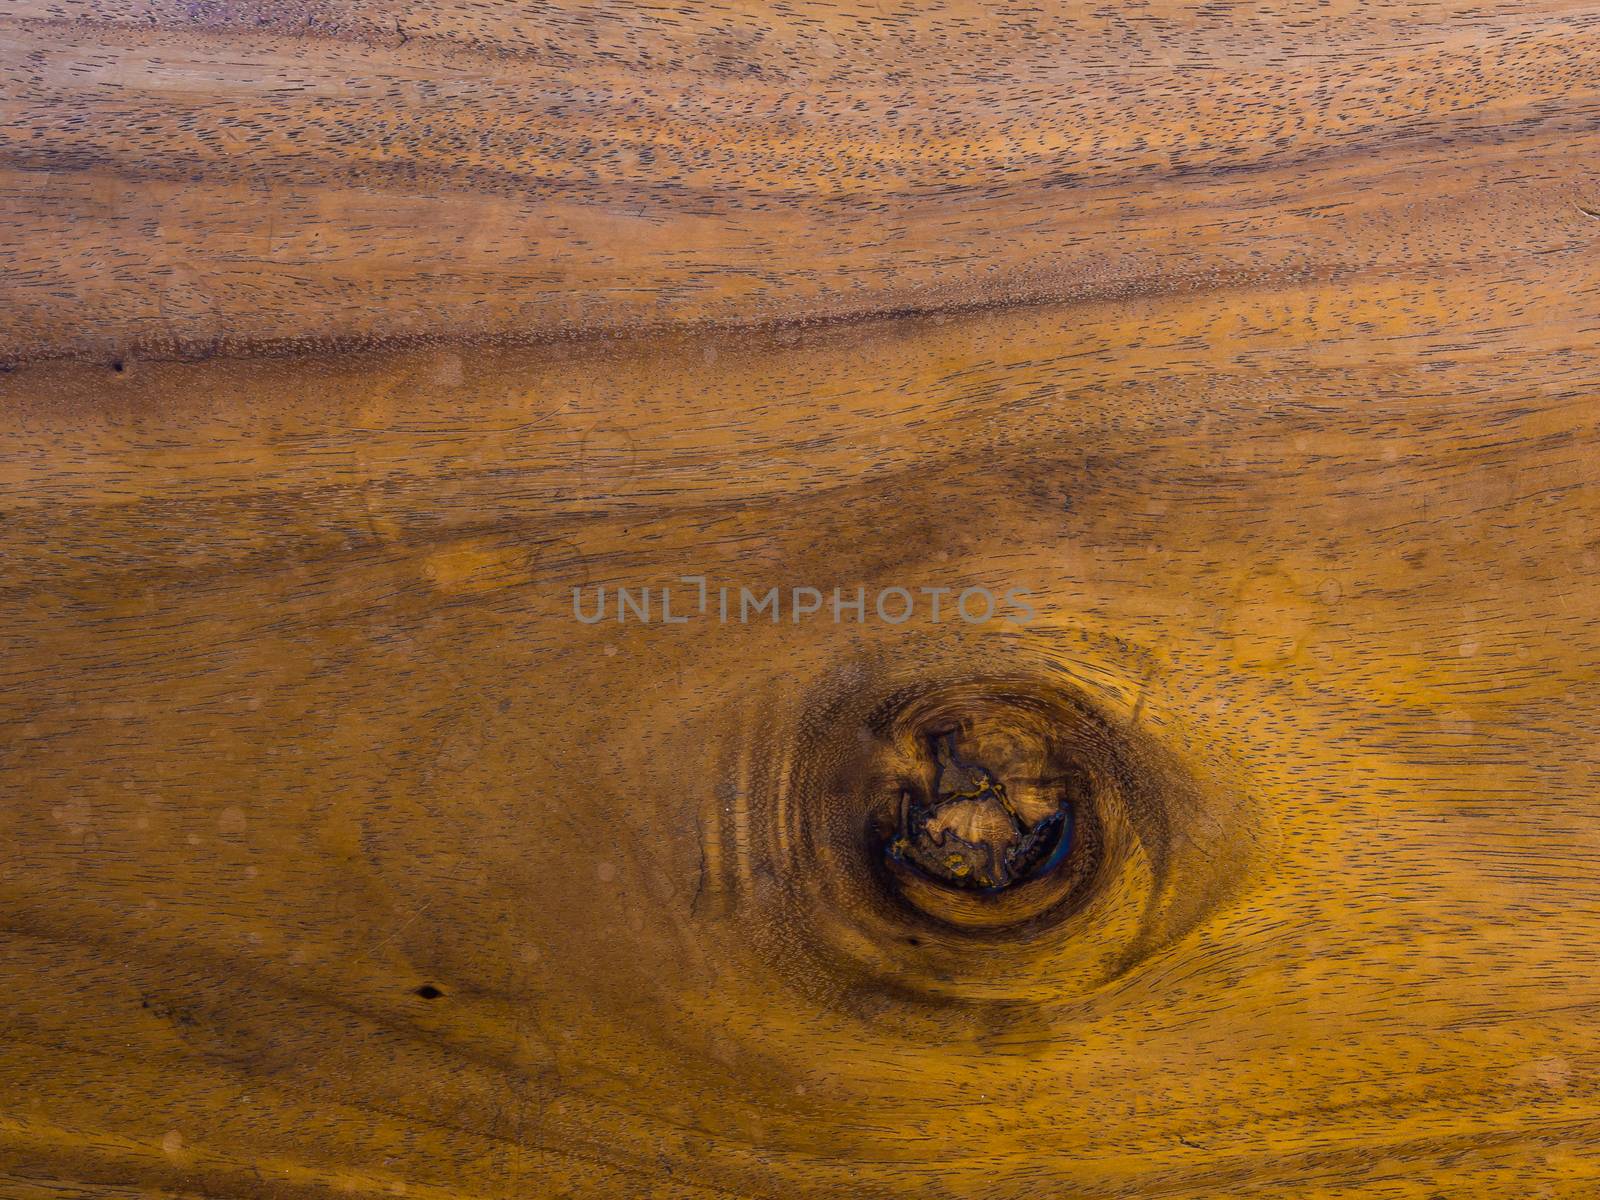 texture of brown wood ,use for background